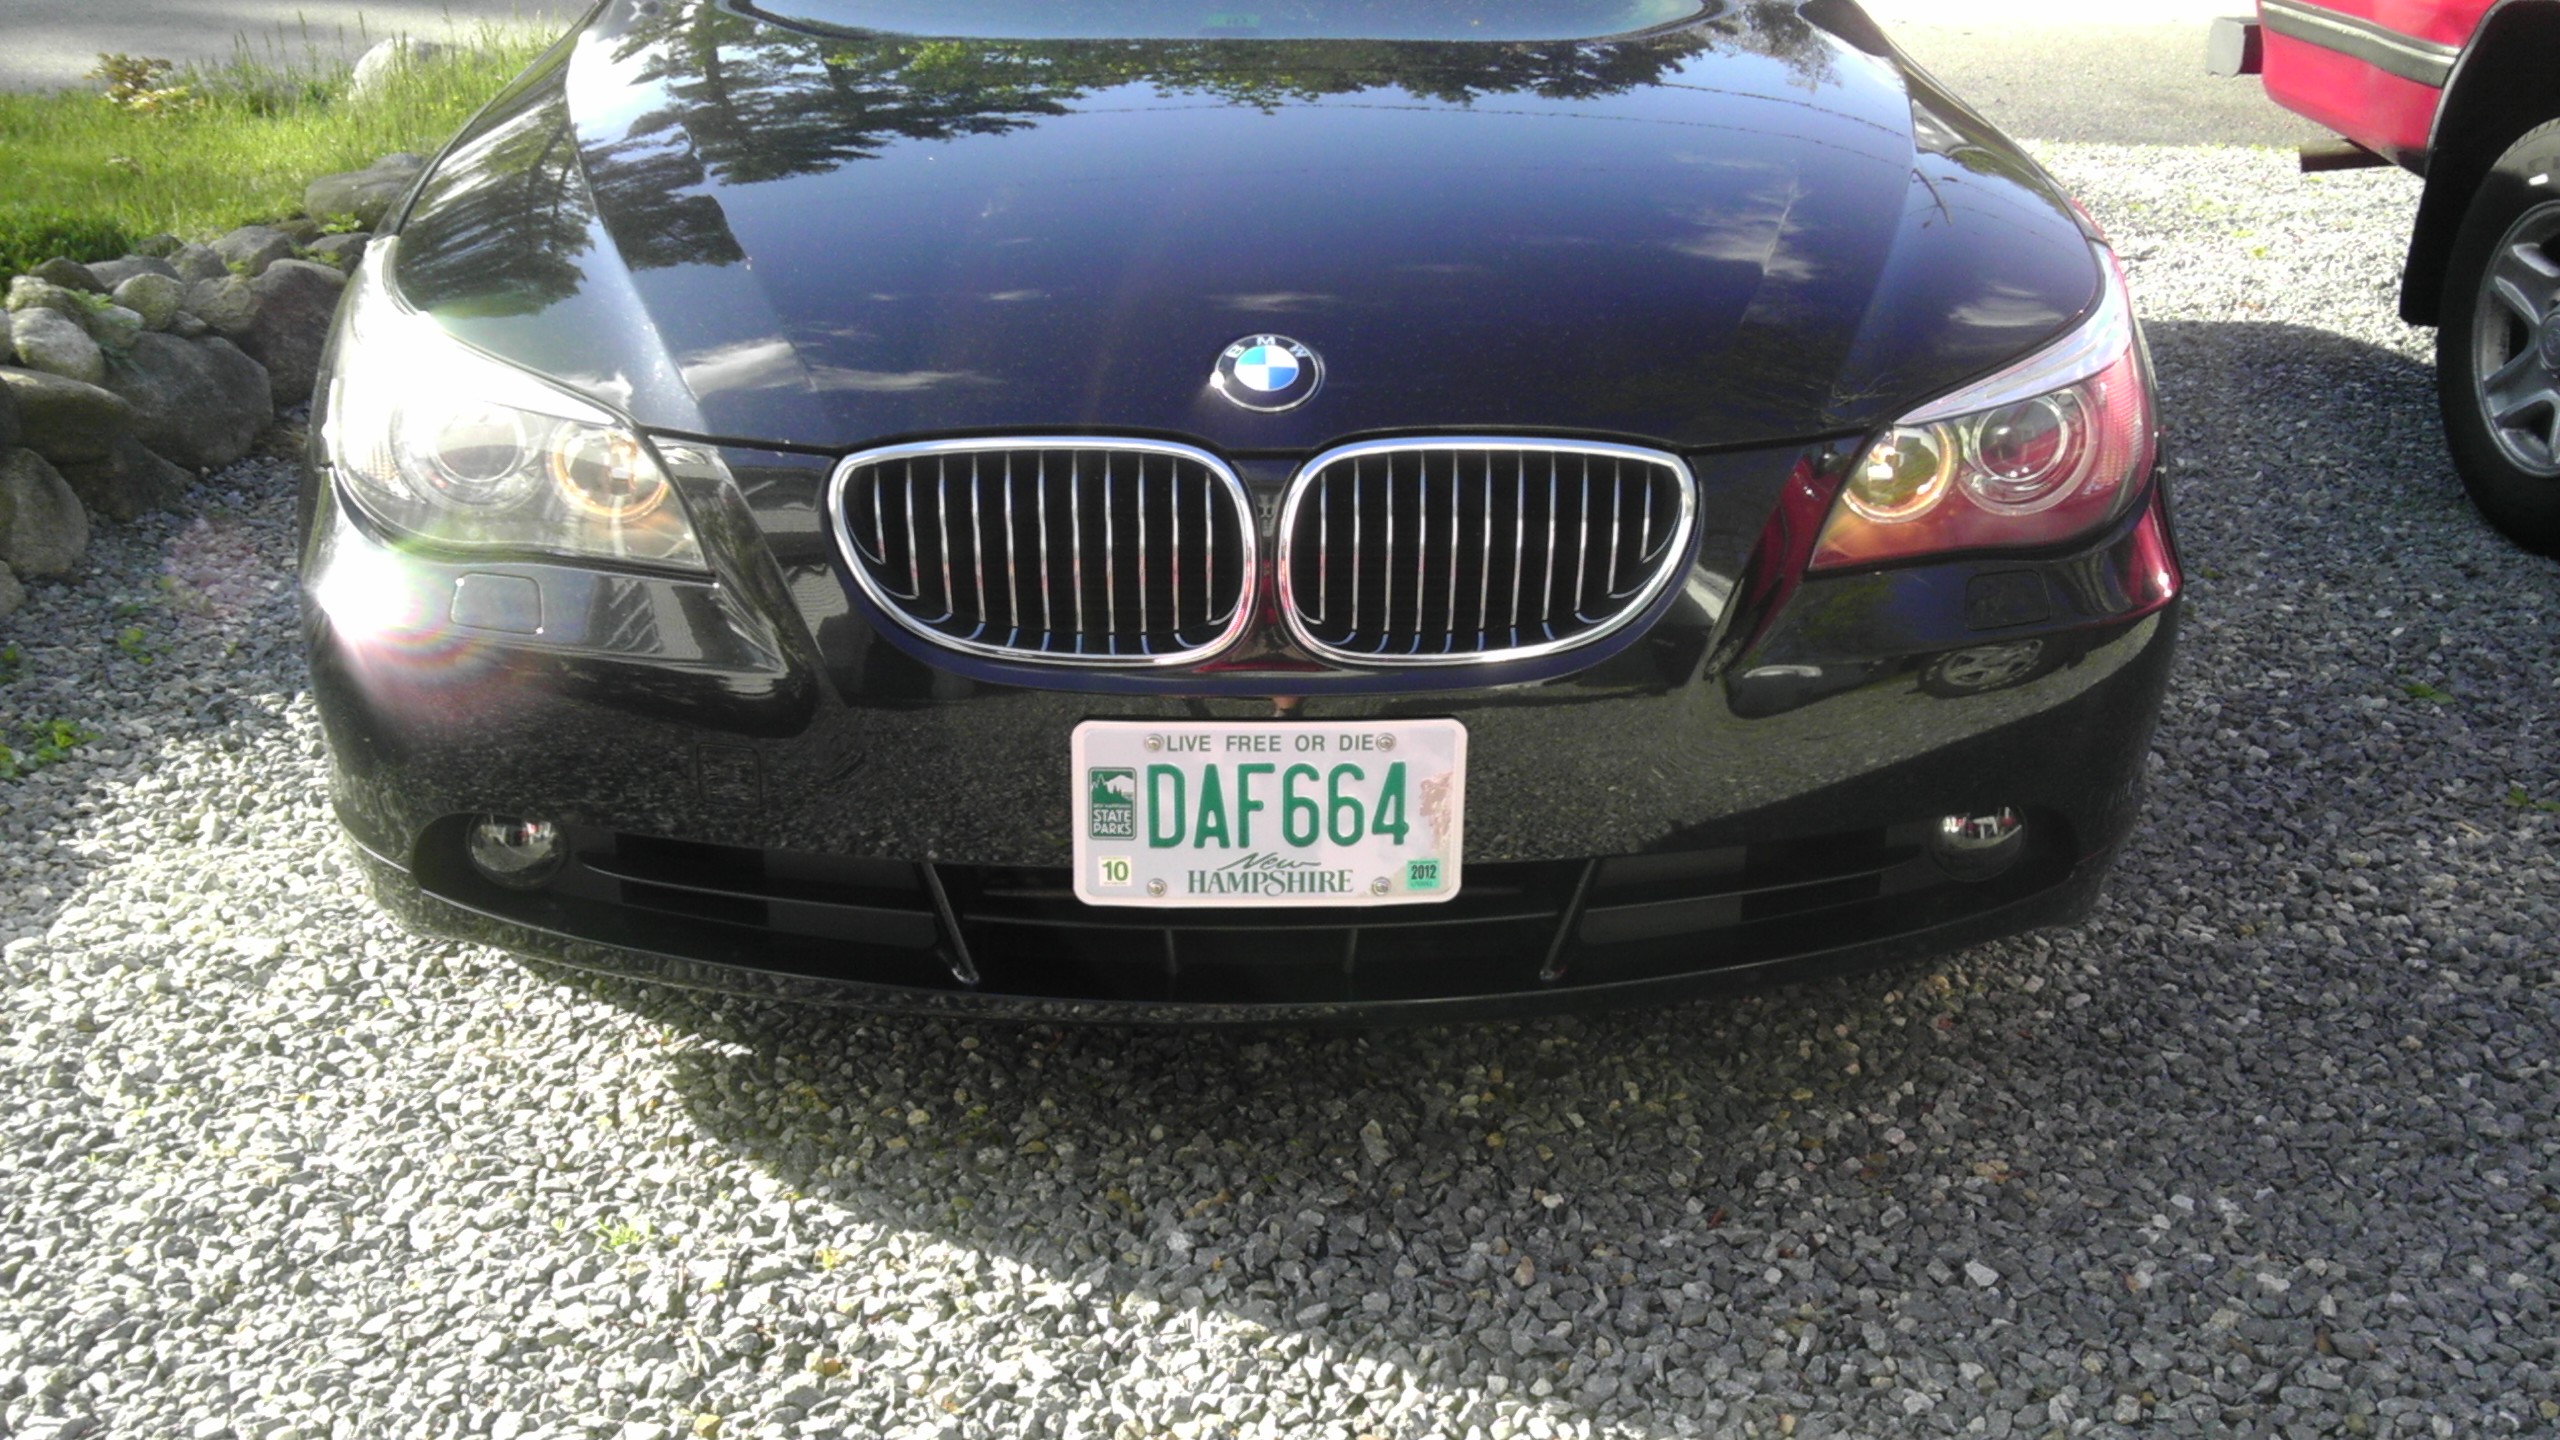 New Front License Plate For BMW 5 Series.